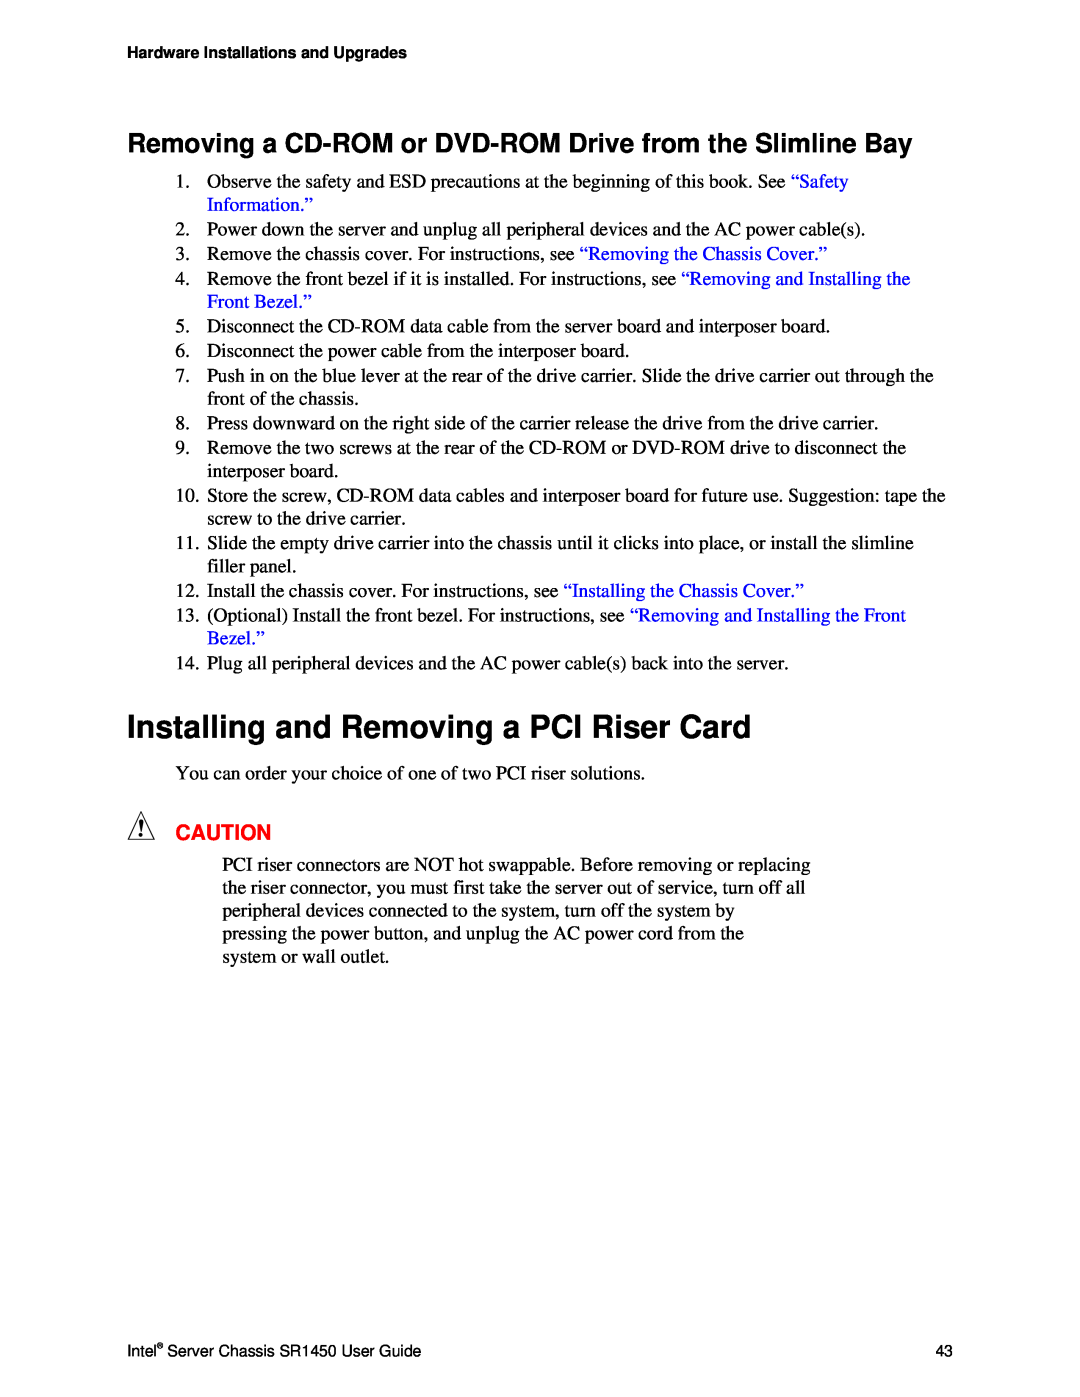 Intel manual Installing and Removing a PCI Riser Card, Intel Server Chassis SR1450 User Guide 